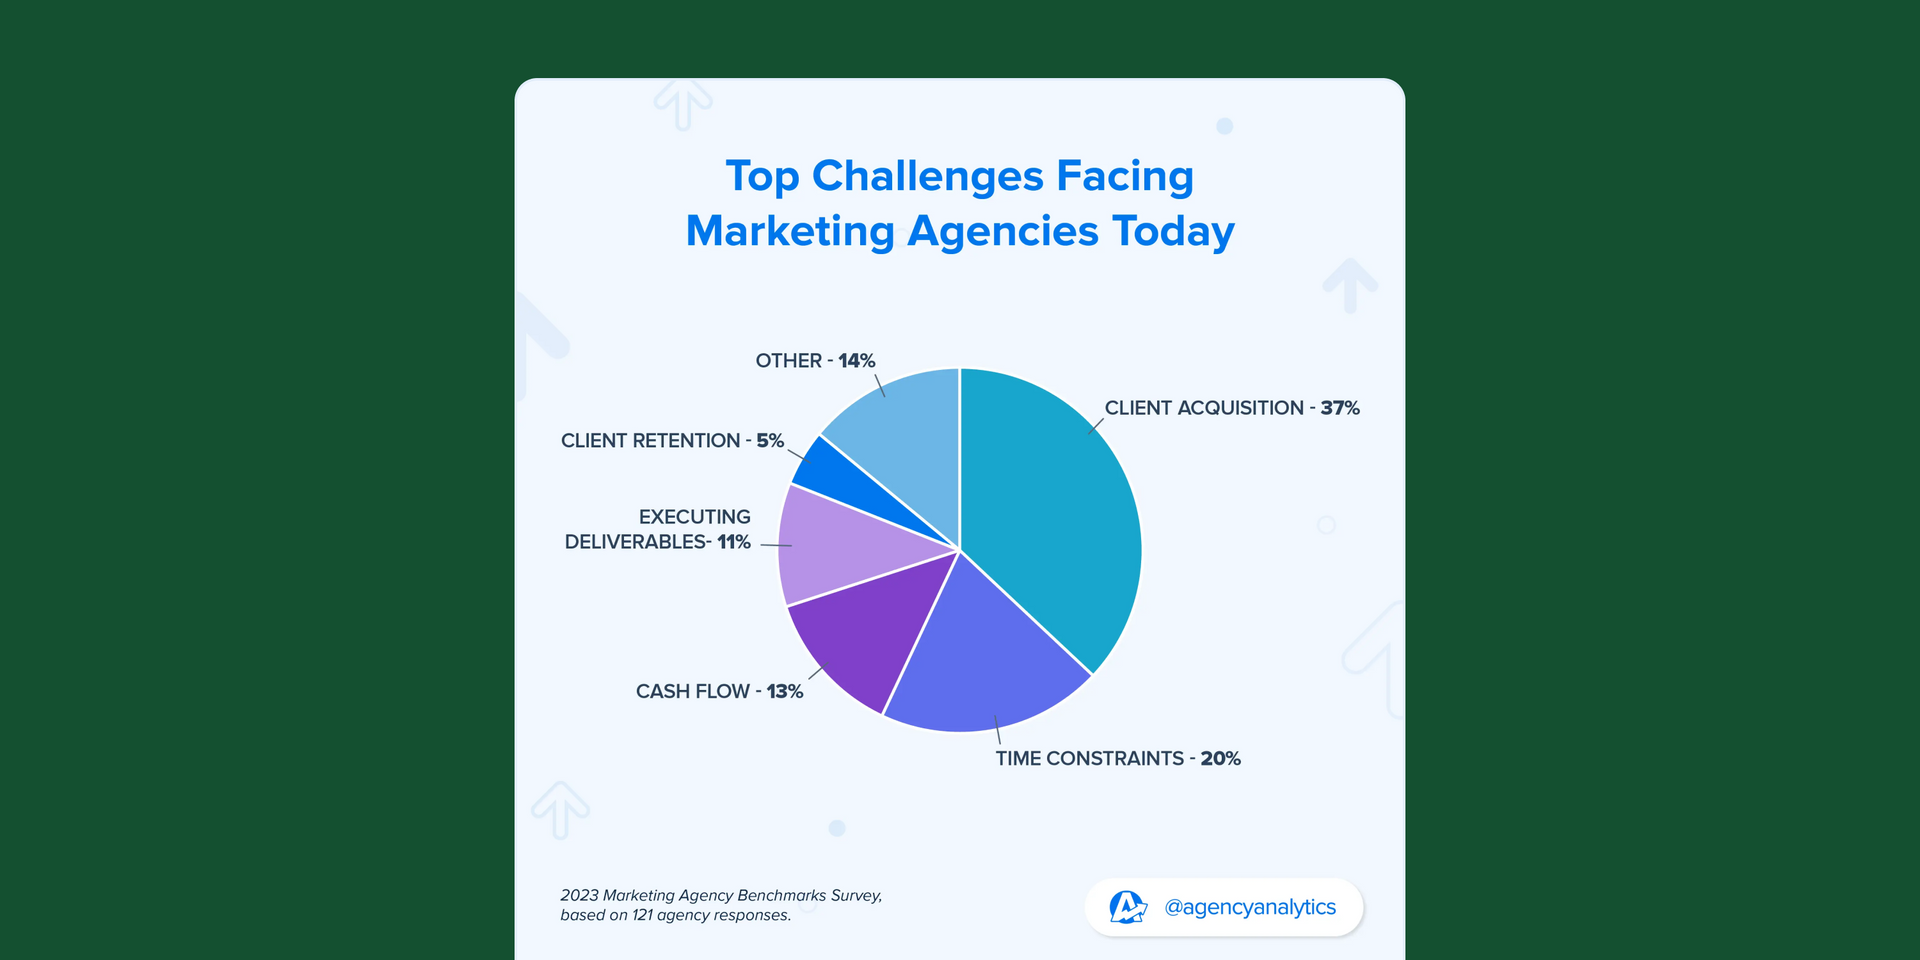 a pie chart shows the top challenges facing marketing agencies today